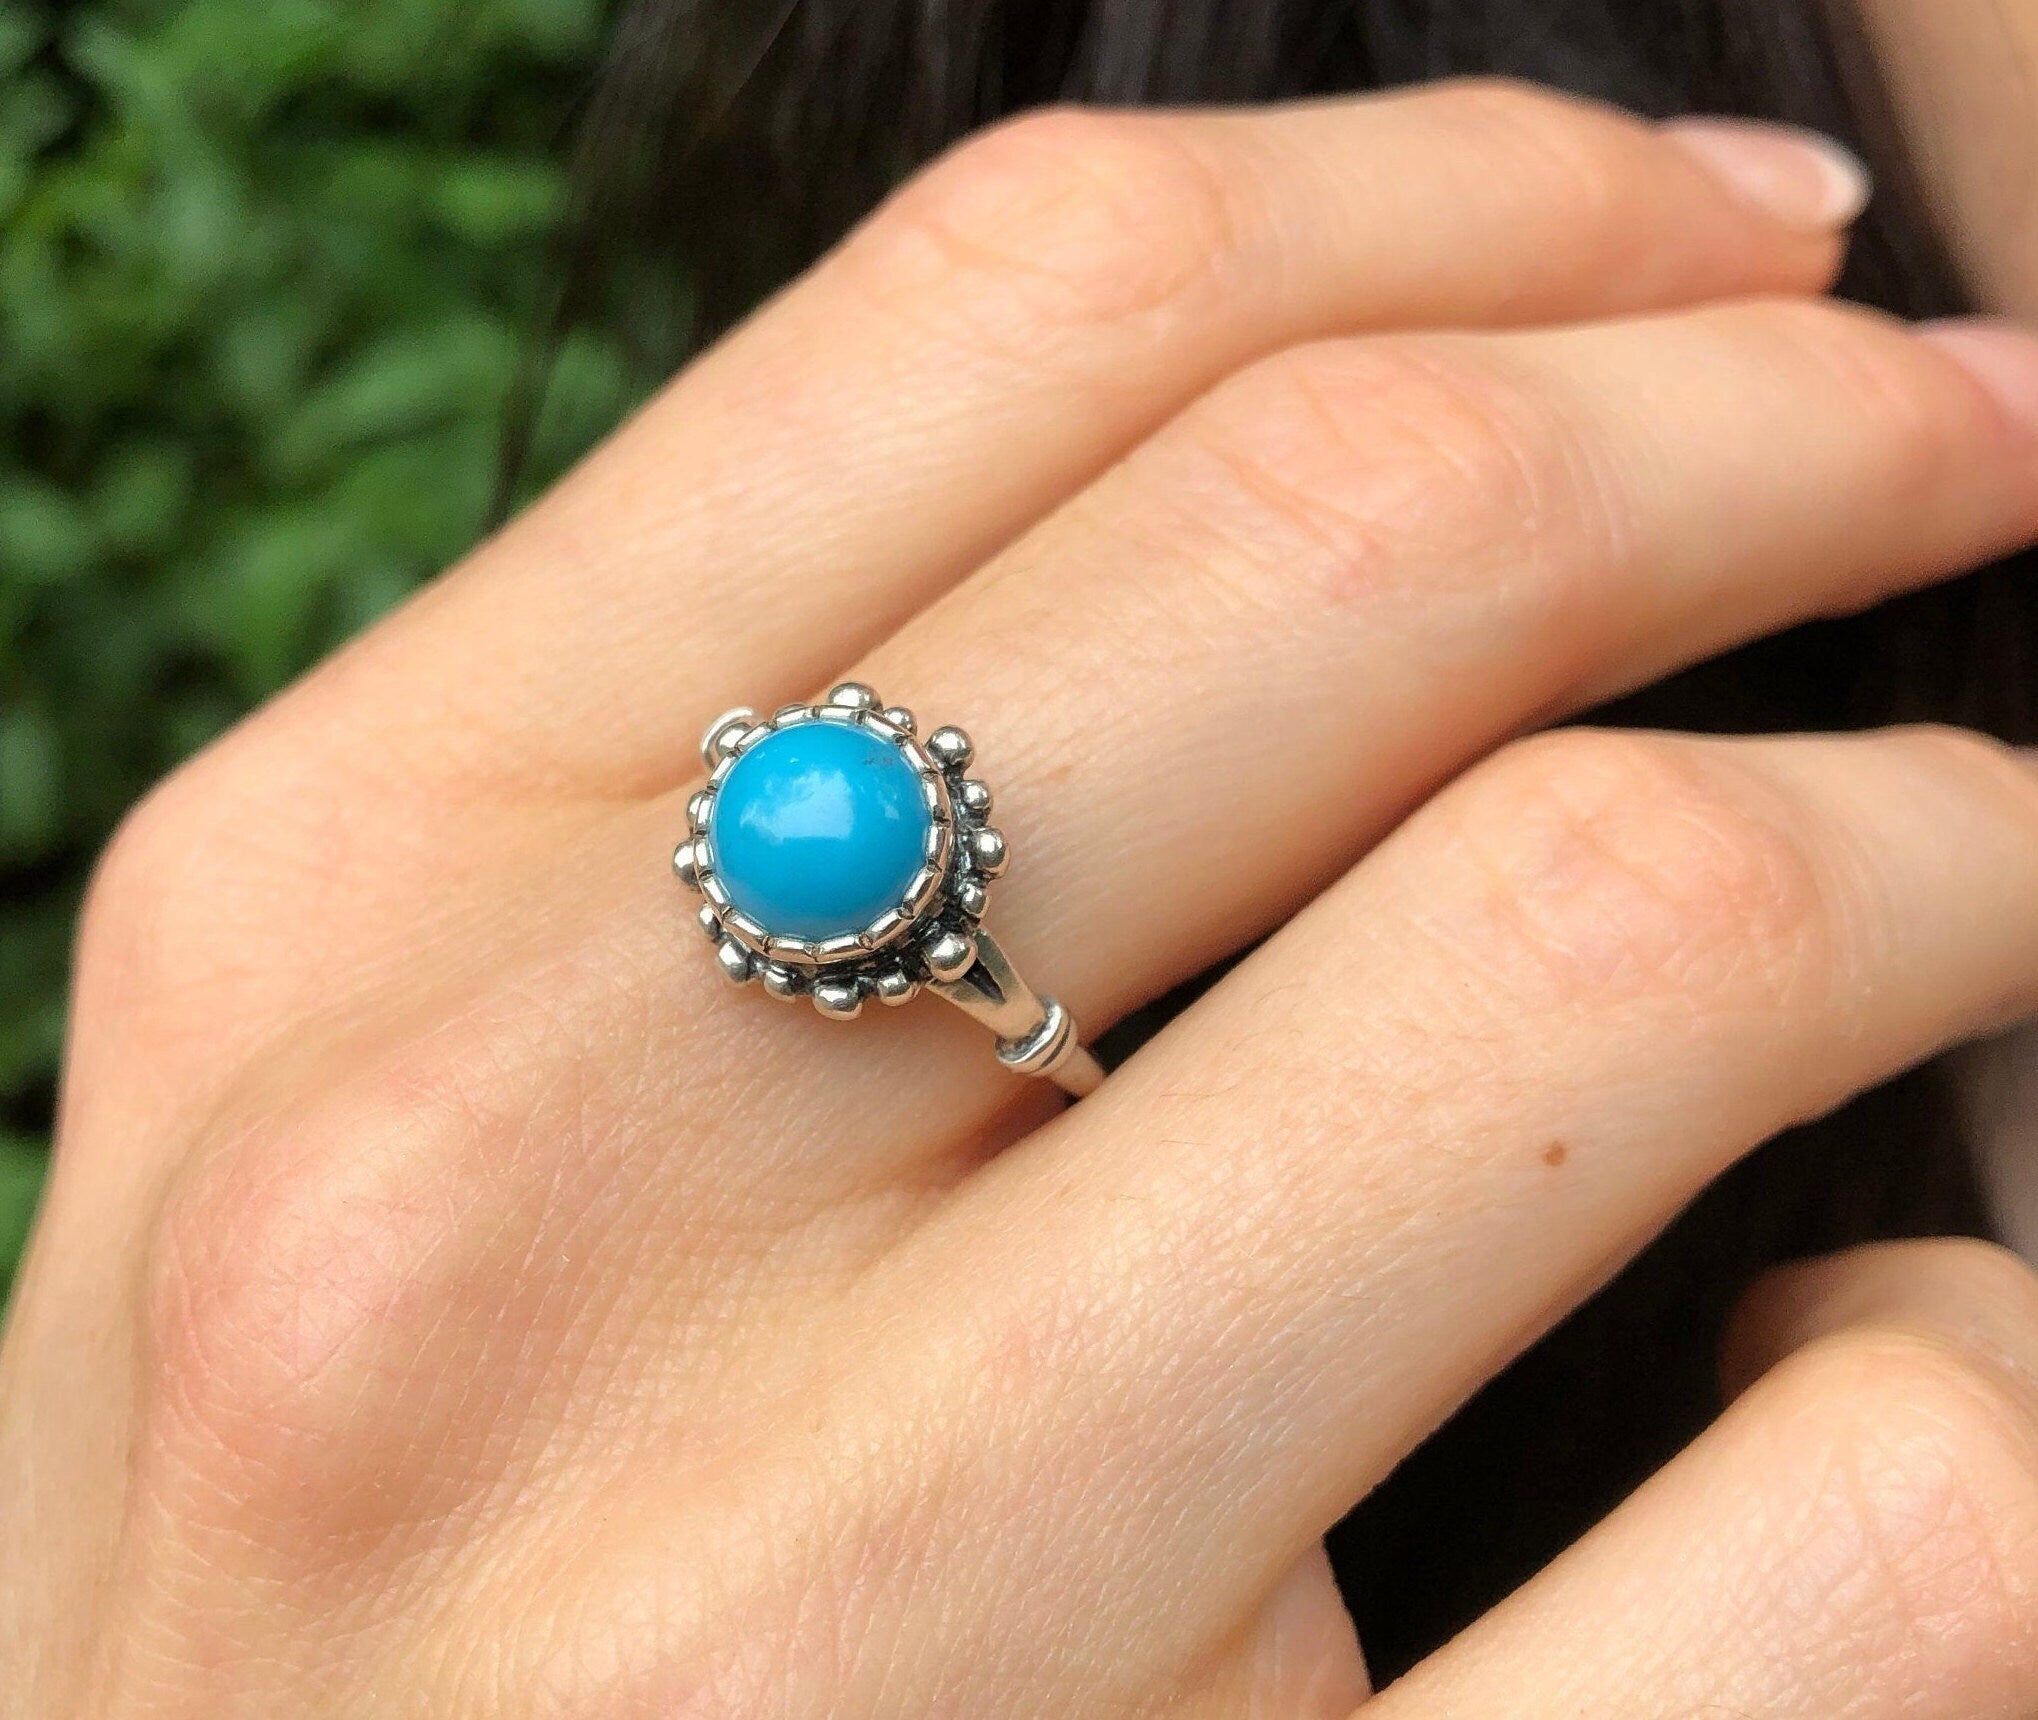 Turquoise Ring, Natural Arizona Turquoise, Blue Vintage Ring, Flower Ring, December Birthstone, Bohemian Ring, Round Ring, Solid Silver Ring